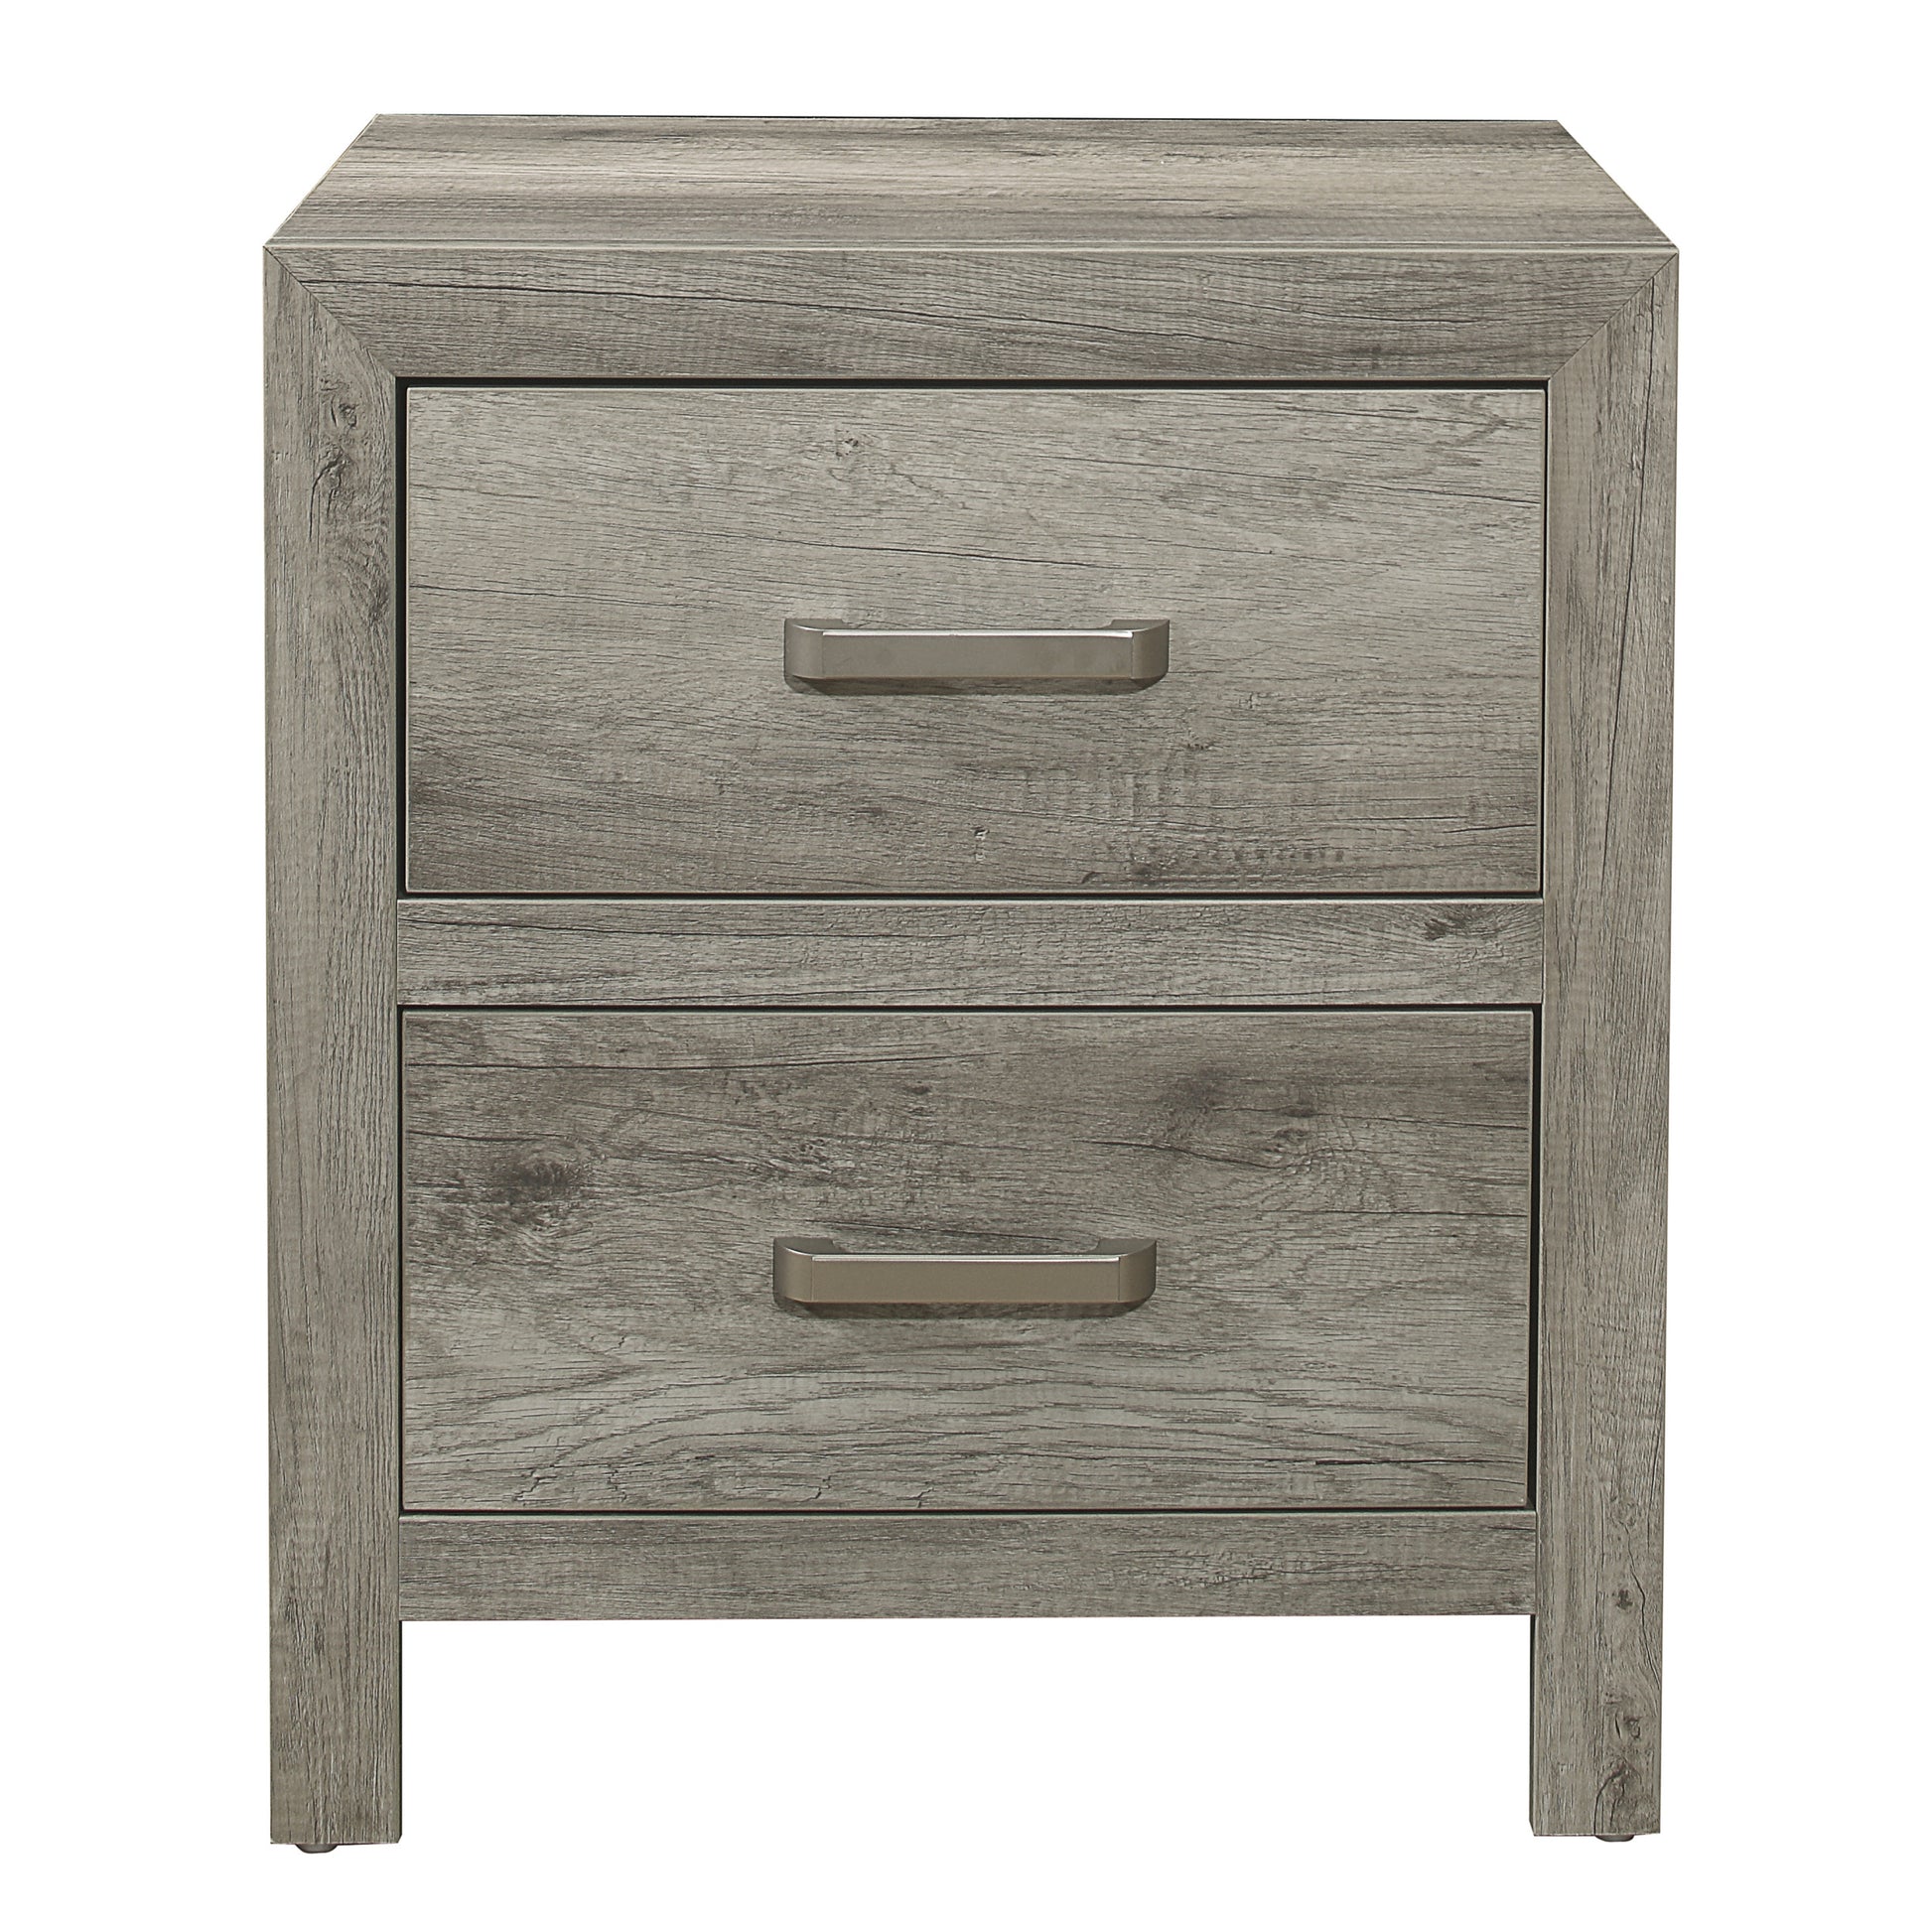 Transitional Aesthetic Bedroom Nightstand Faux Wood gray-2 drawers-bedroom-transitional-wood